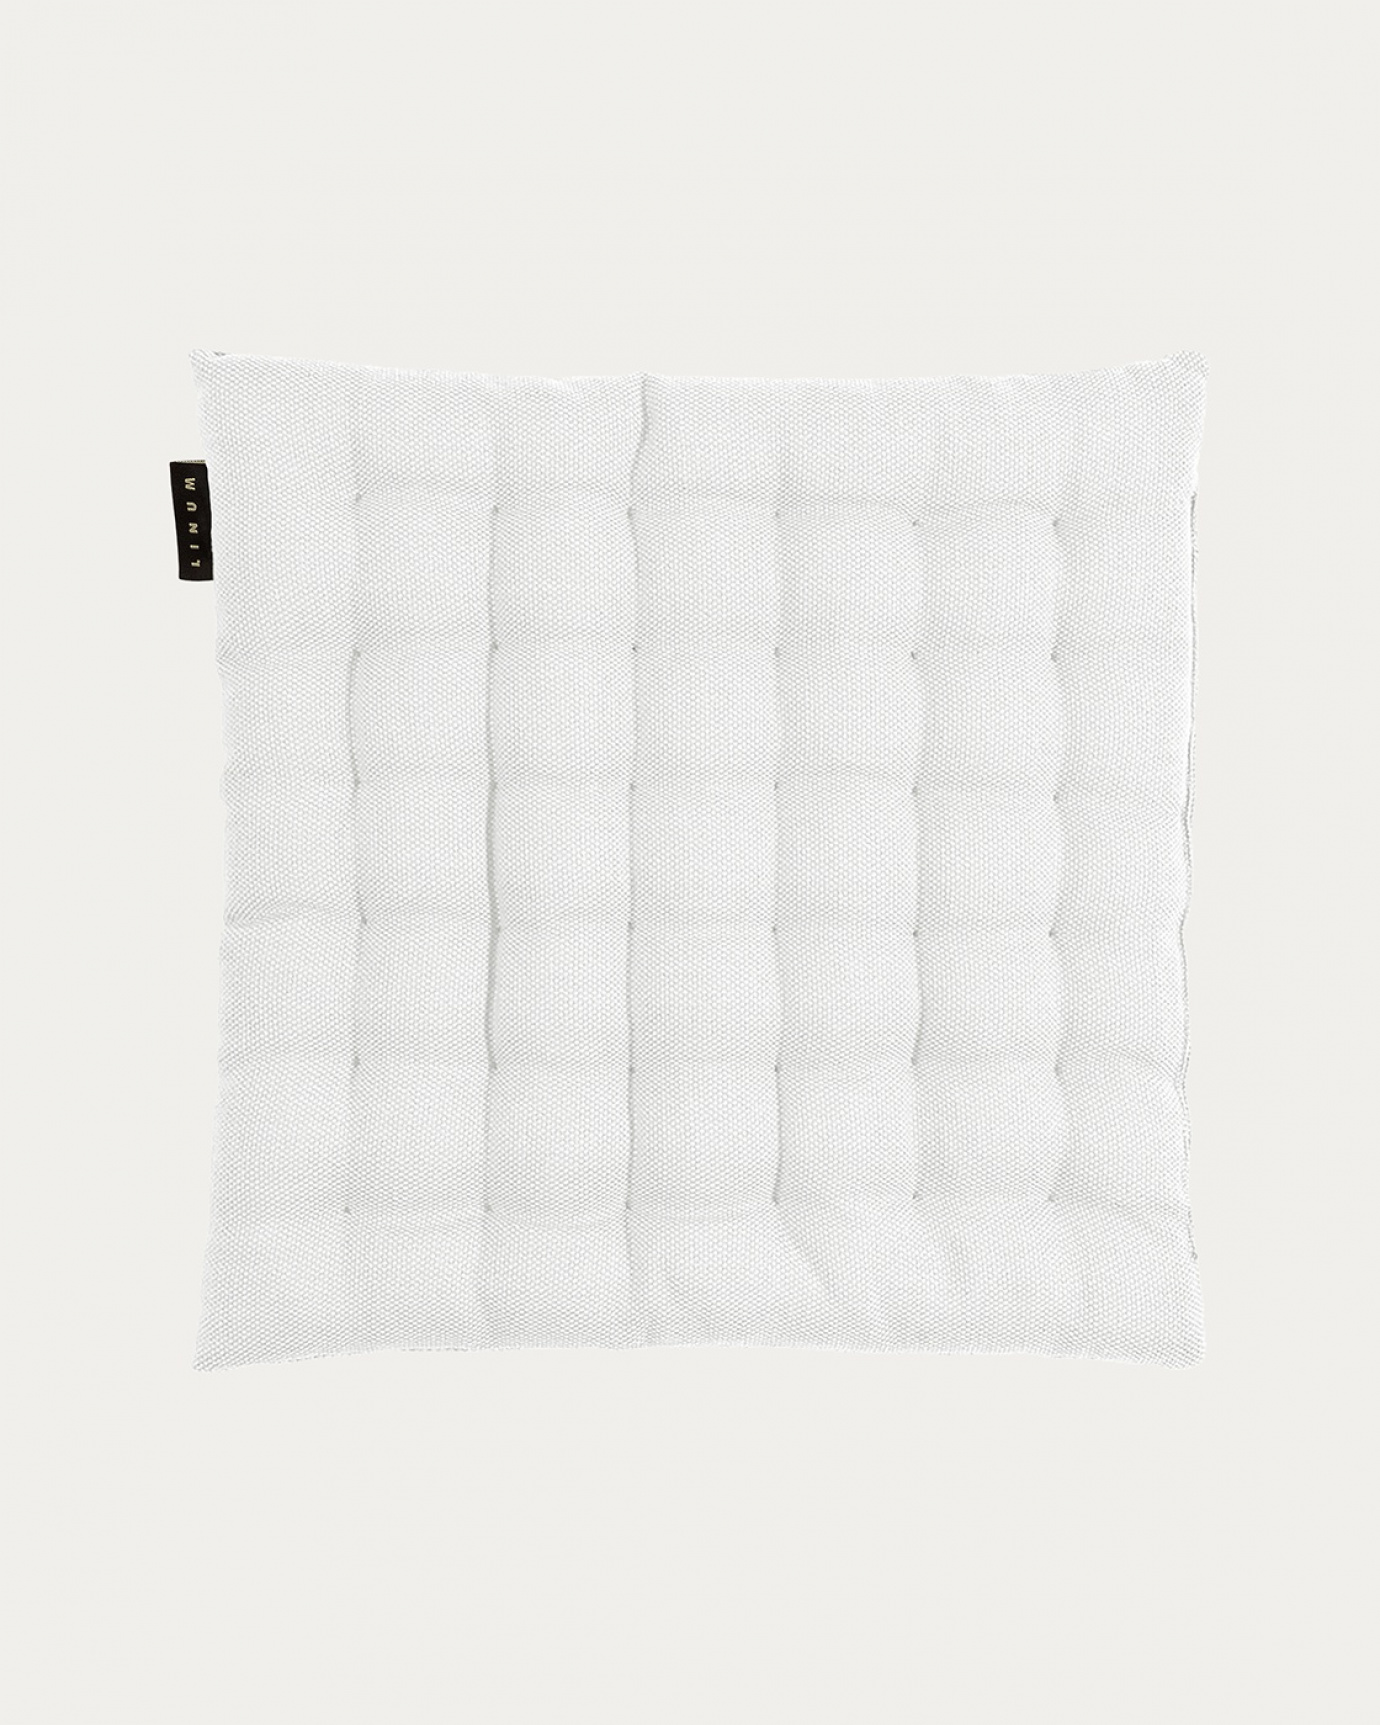 Product image white PEPPER seat cushion made of soft cotton with recycled polyester filling from LINUM DESIGN. Size 40x40 cm.